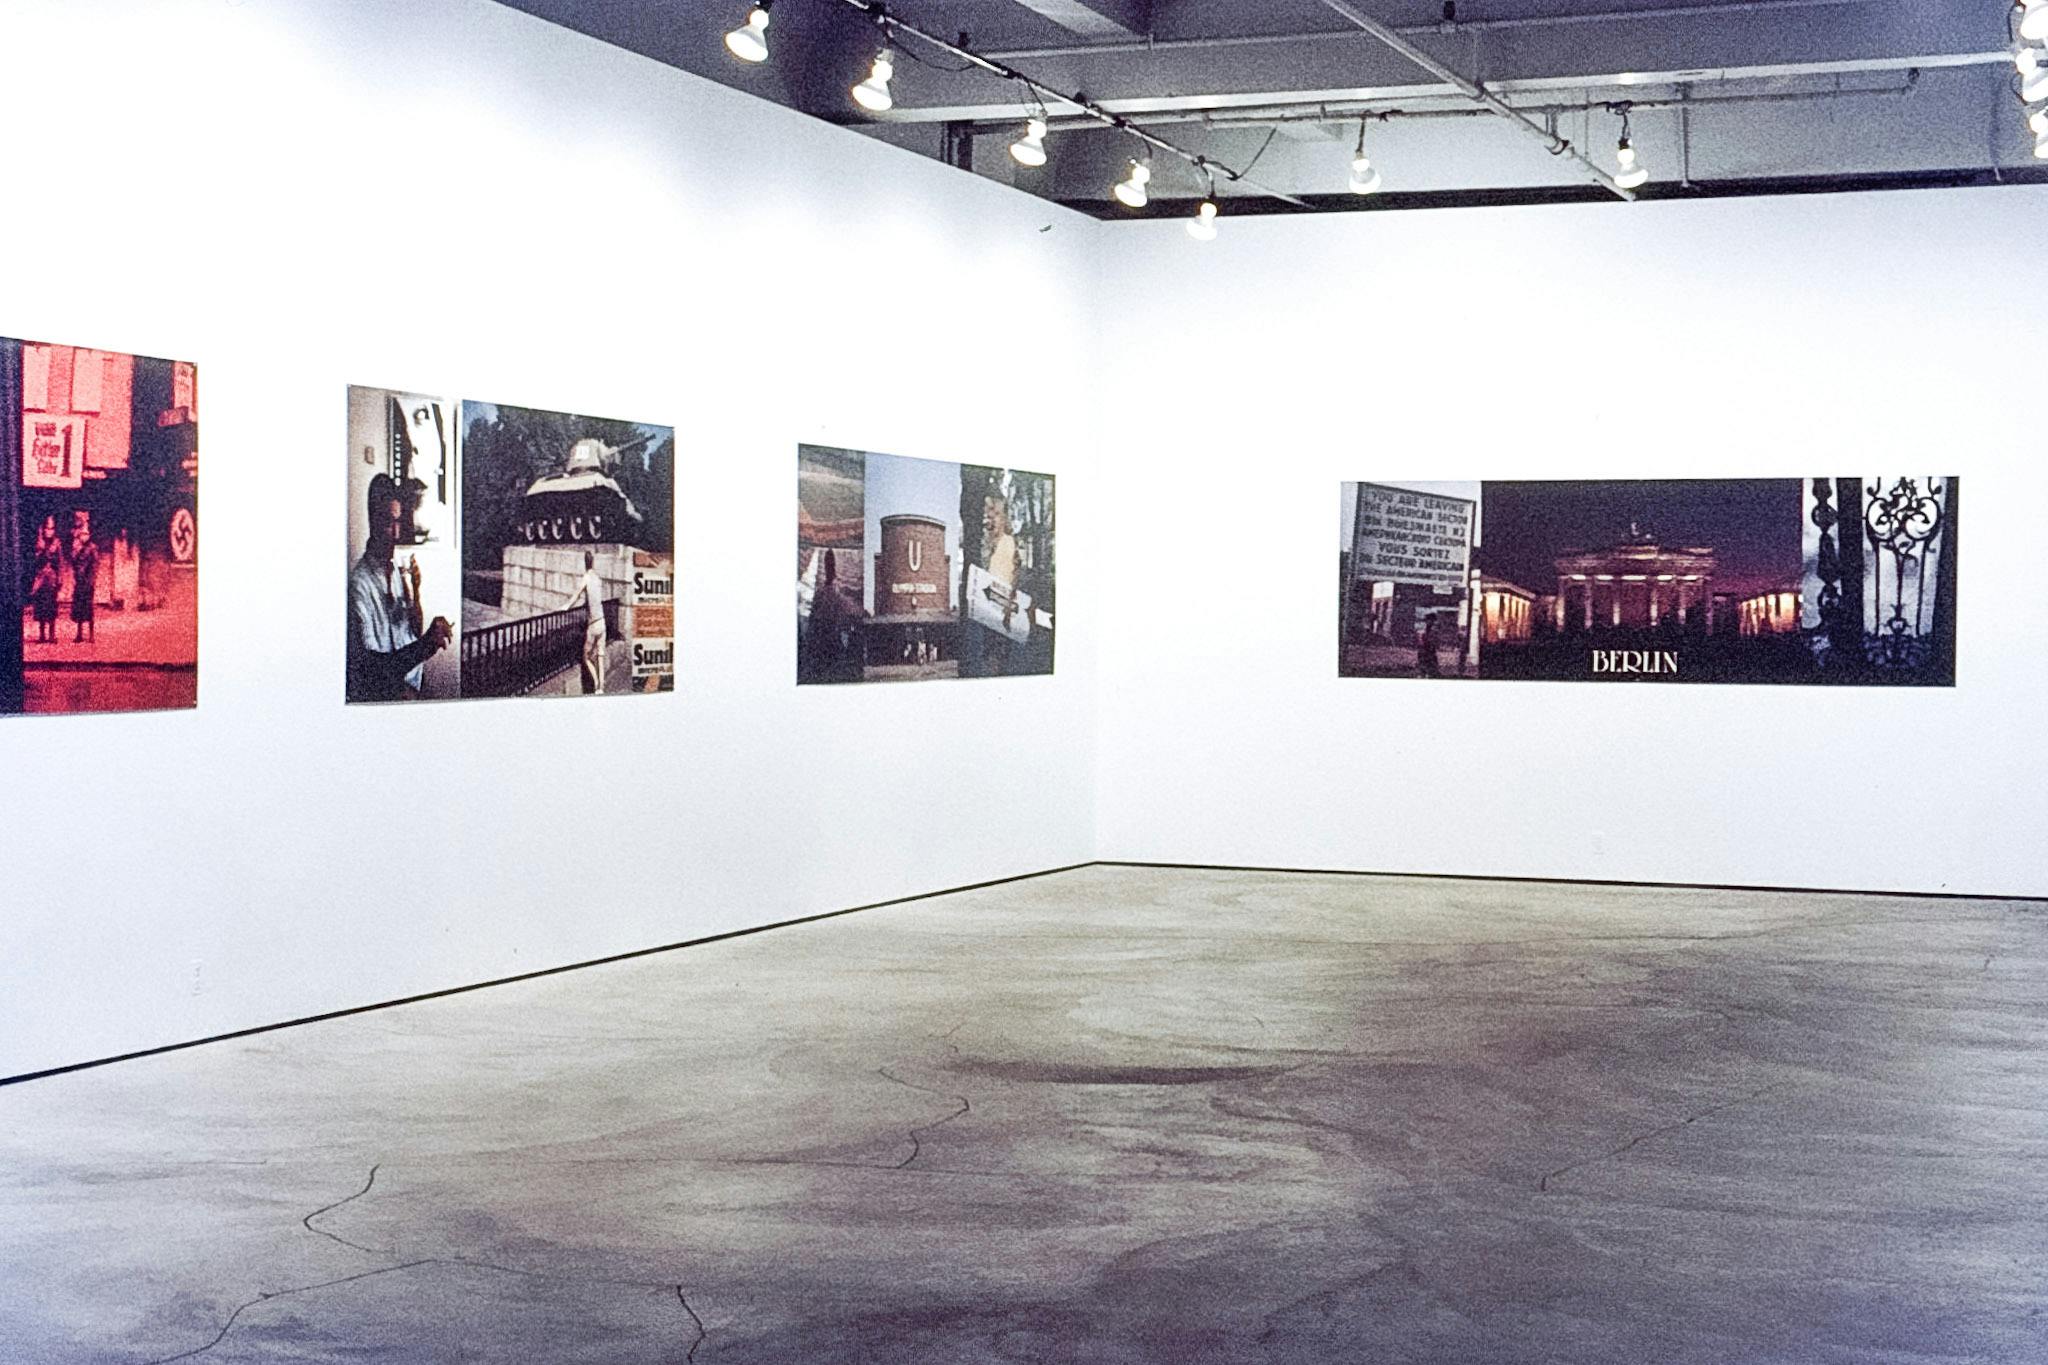 Four horizontal works spread across two gallery walls. The works each have 2 or three photos in them. The photos include a rec-coloured image of Nazi Germany, a baseball field, and a metal gate.